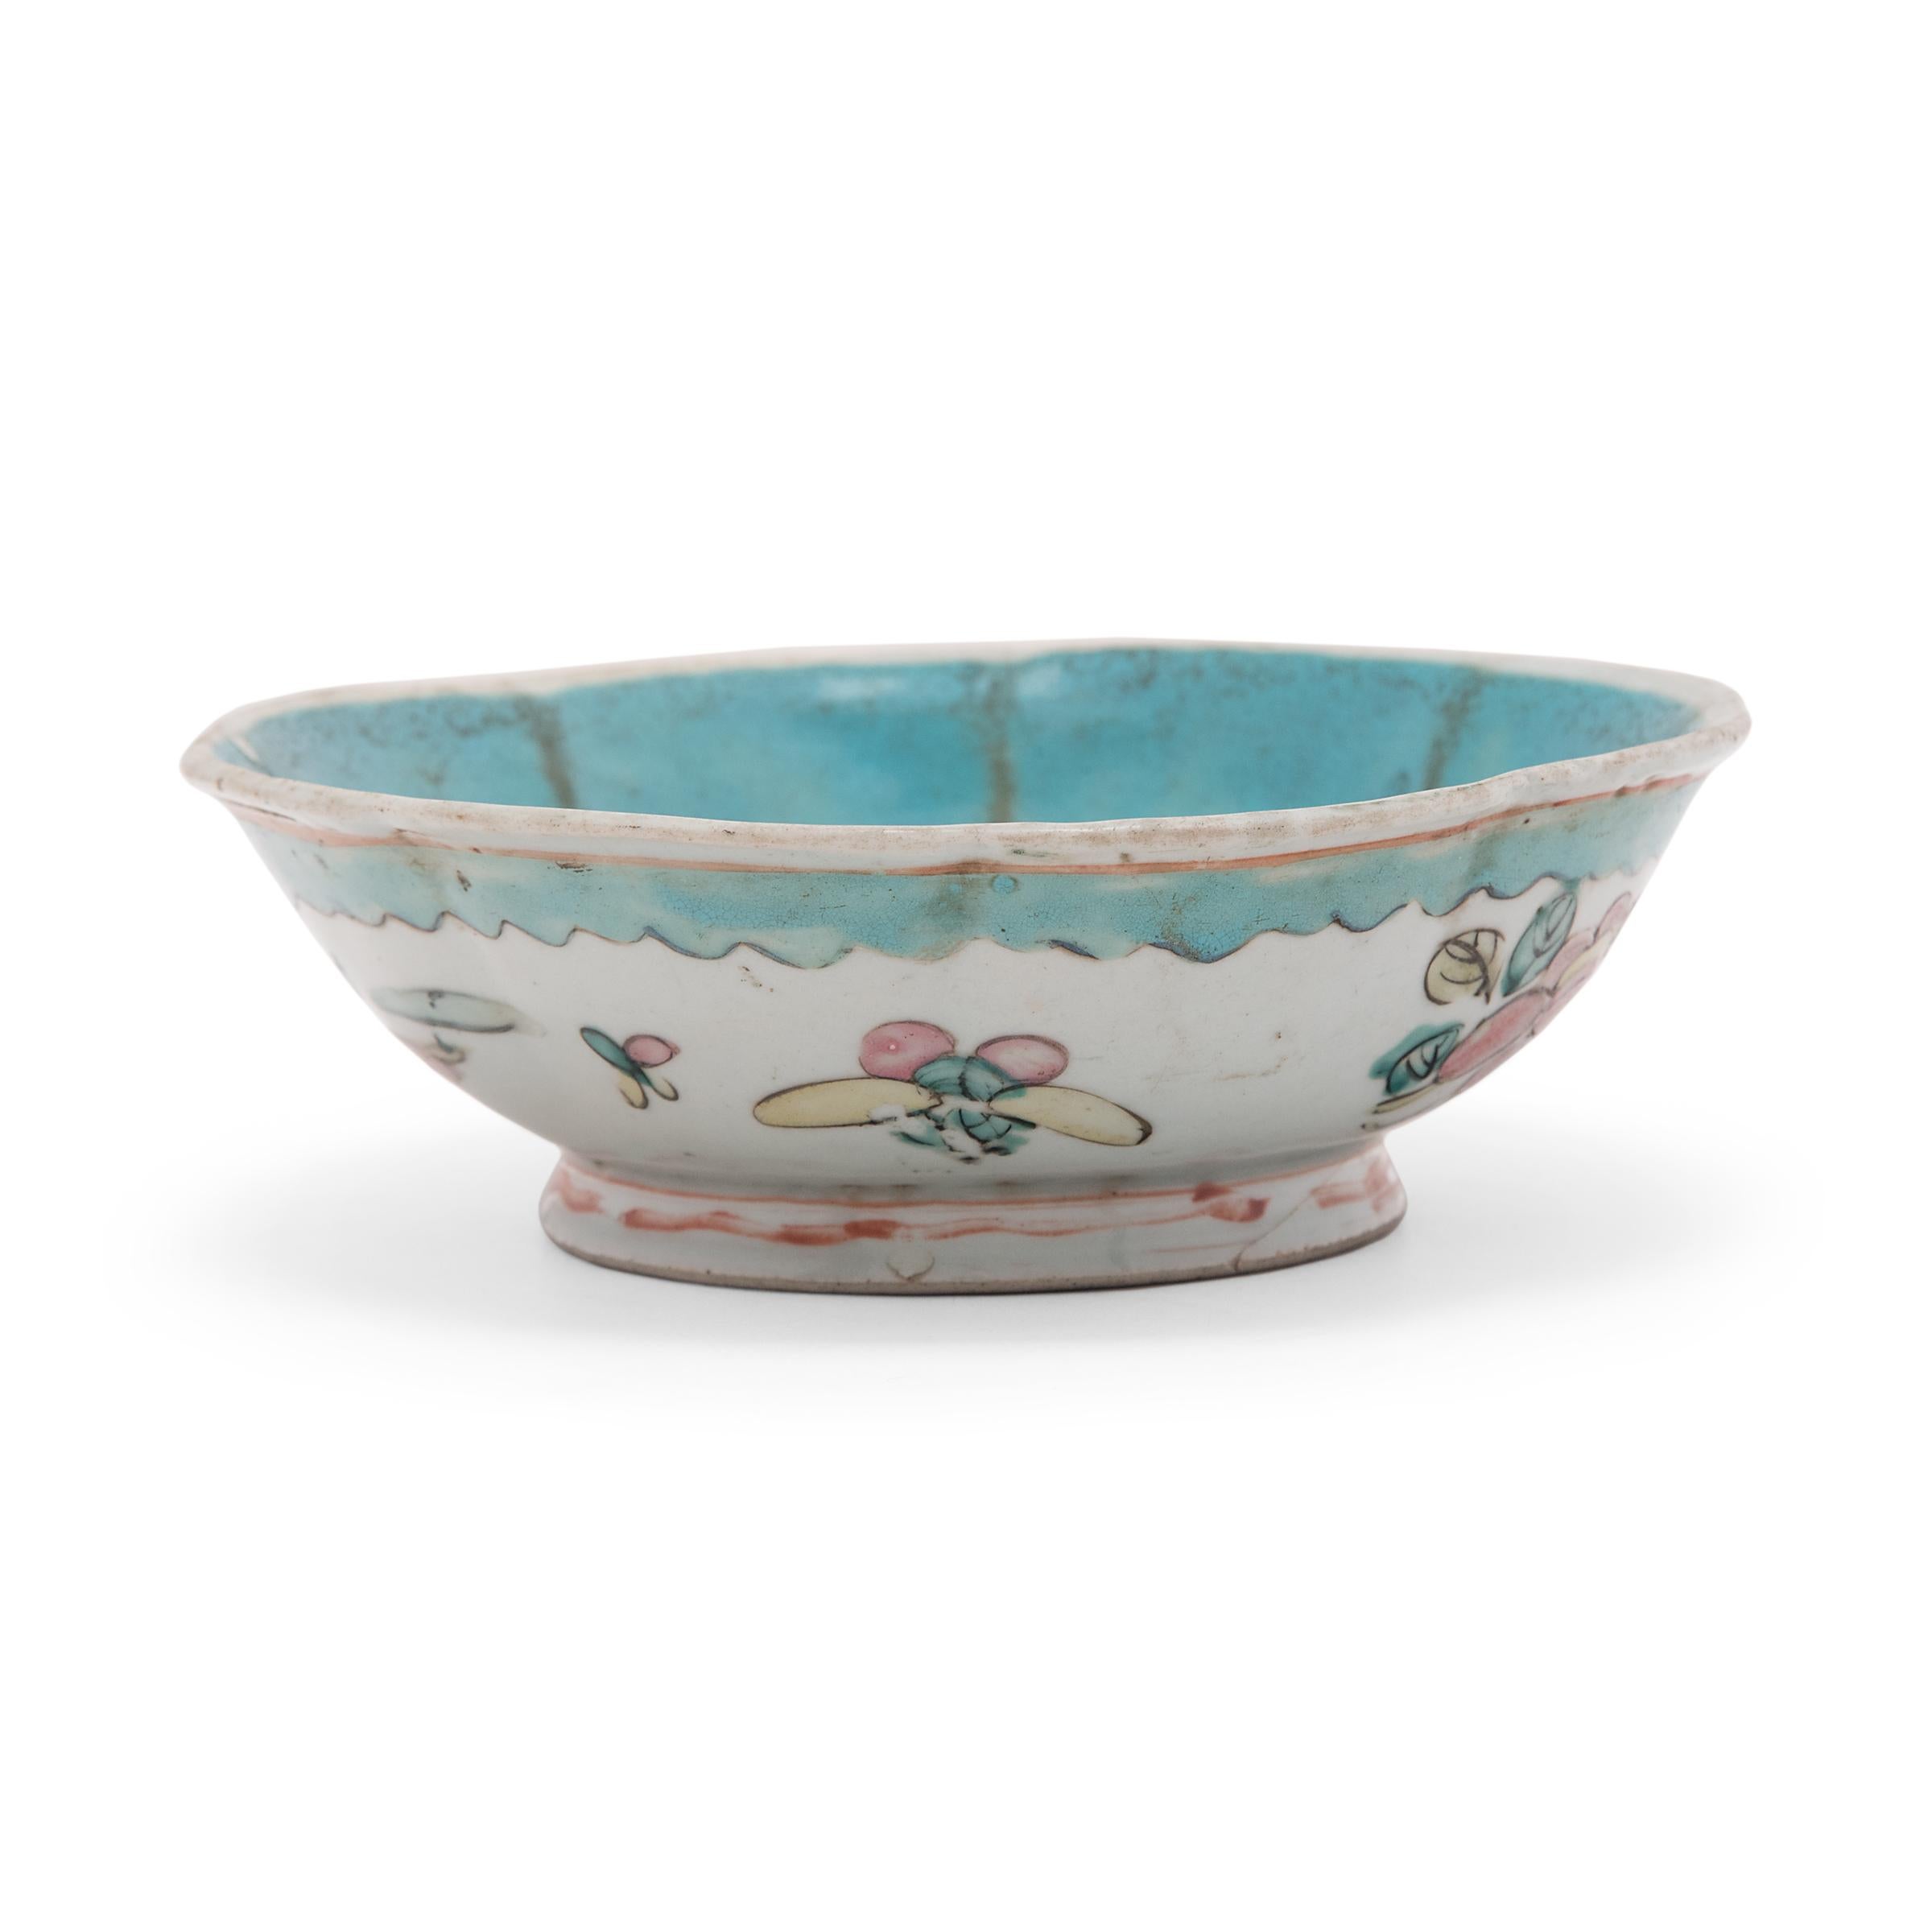 This colorful porcelain bowl dates to the mid-19th century and was originally used as a serving dish for ritual offerings, placed before a home altar and piled high with fruit, baked goods, and other foods. Shaped like an eight-petal flower, the